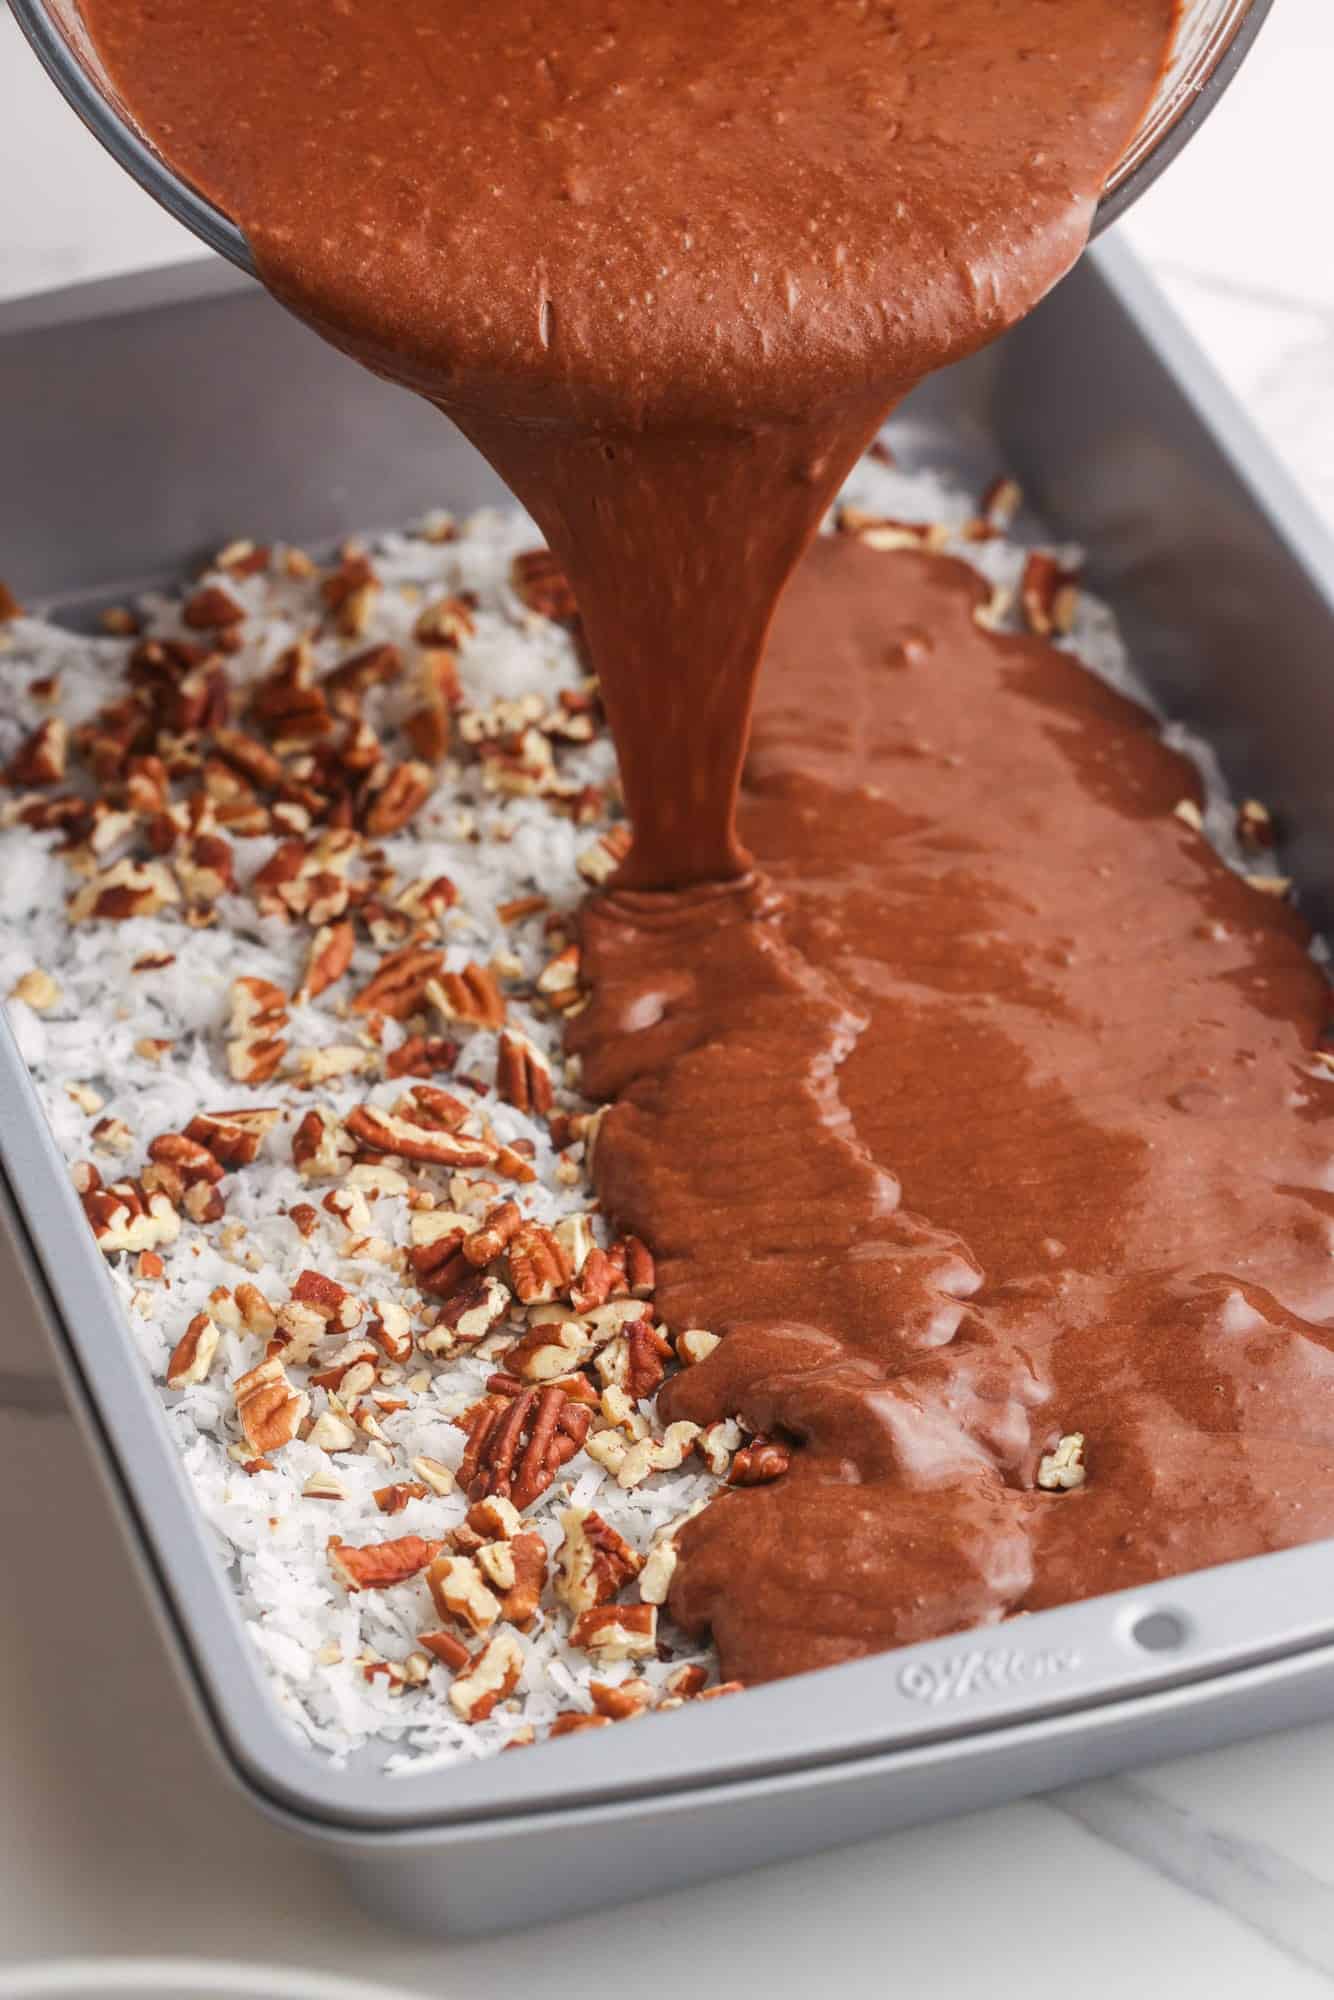 chocolate cake batter poured over coconut and pecans.